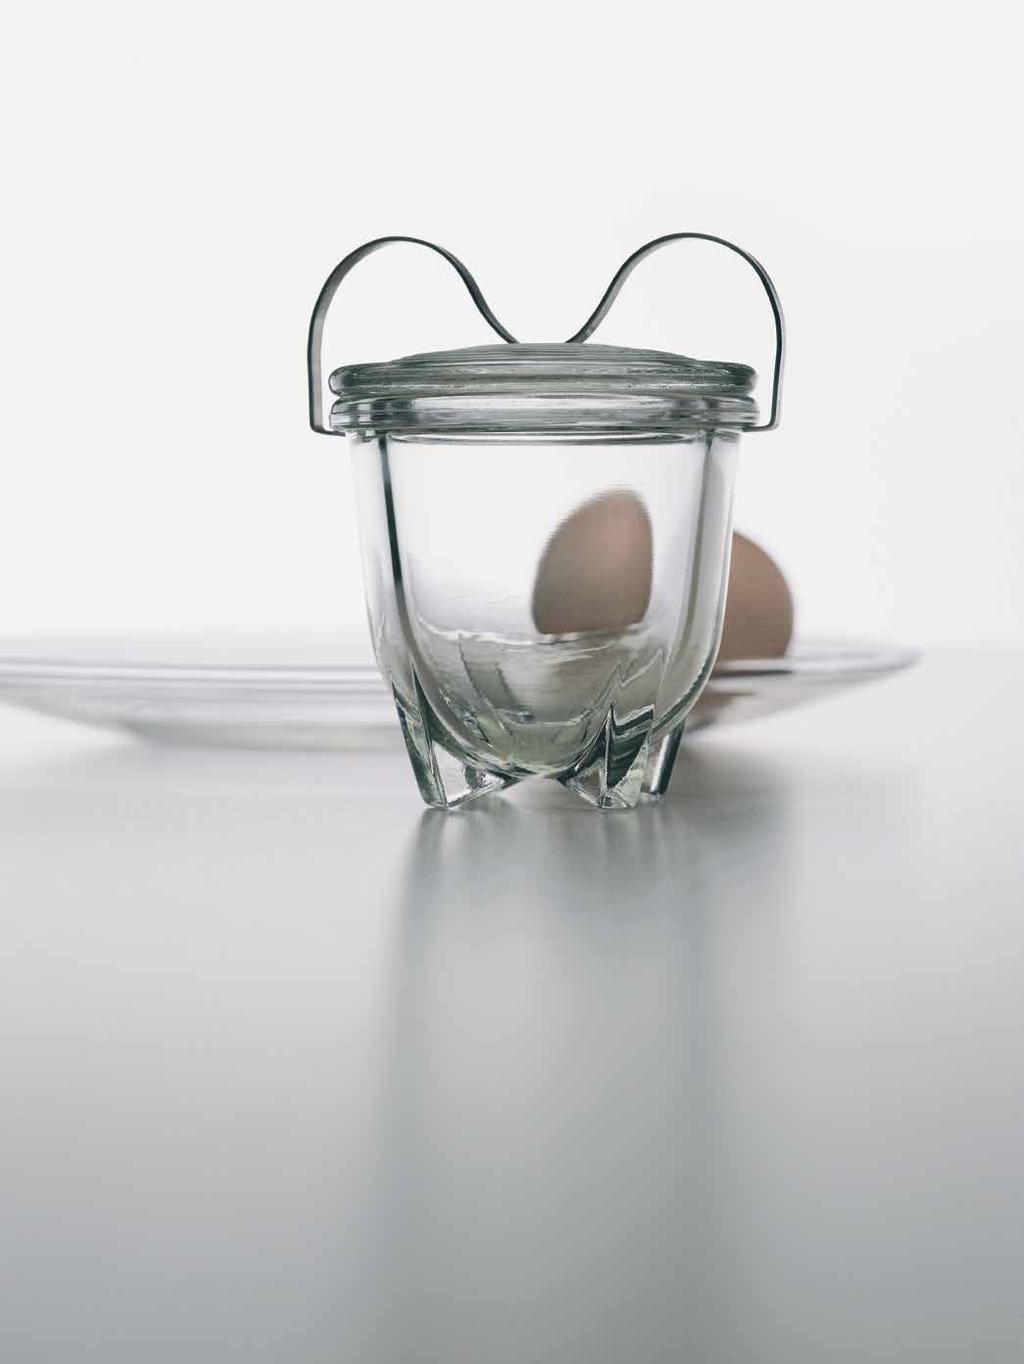 EDITION WILHELM WAGENFELD COMEBACK EINES DESIGNKLASSIKERS. DER EIERKOCH VON WILHELM WAGENFELD. COMEBACK OF A DESIGN CLASSIC. THE EGG CODDLER BY WILHELM WAGENFELD.